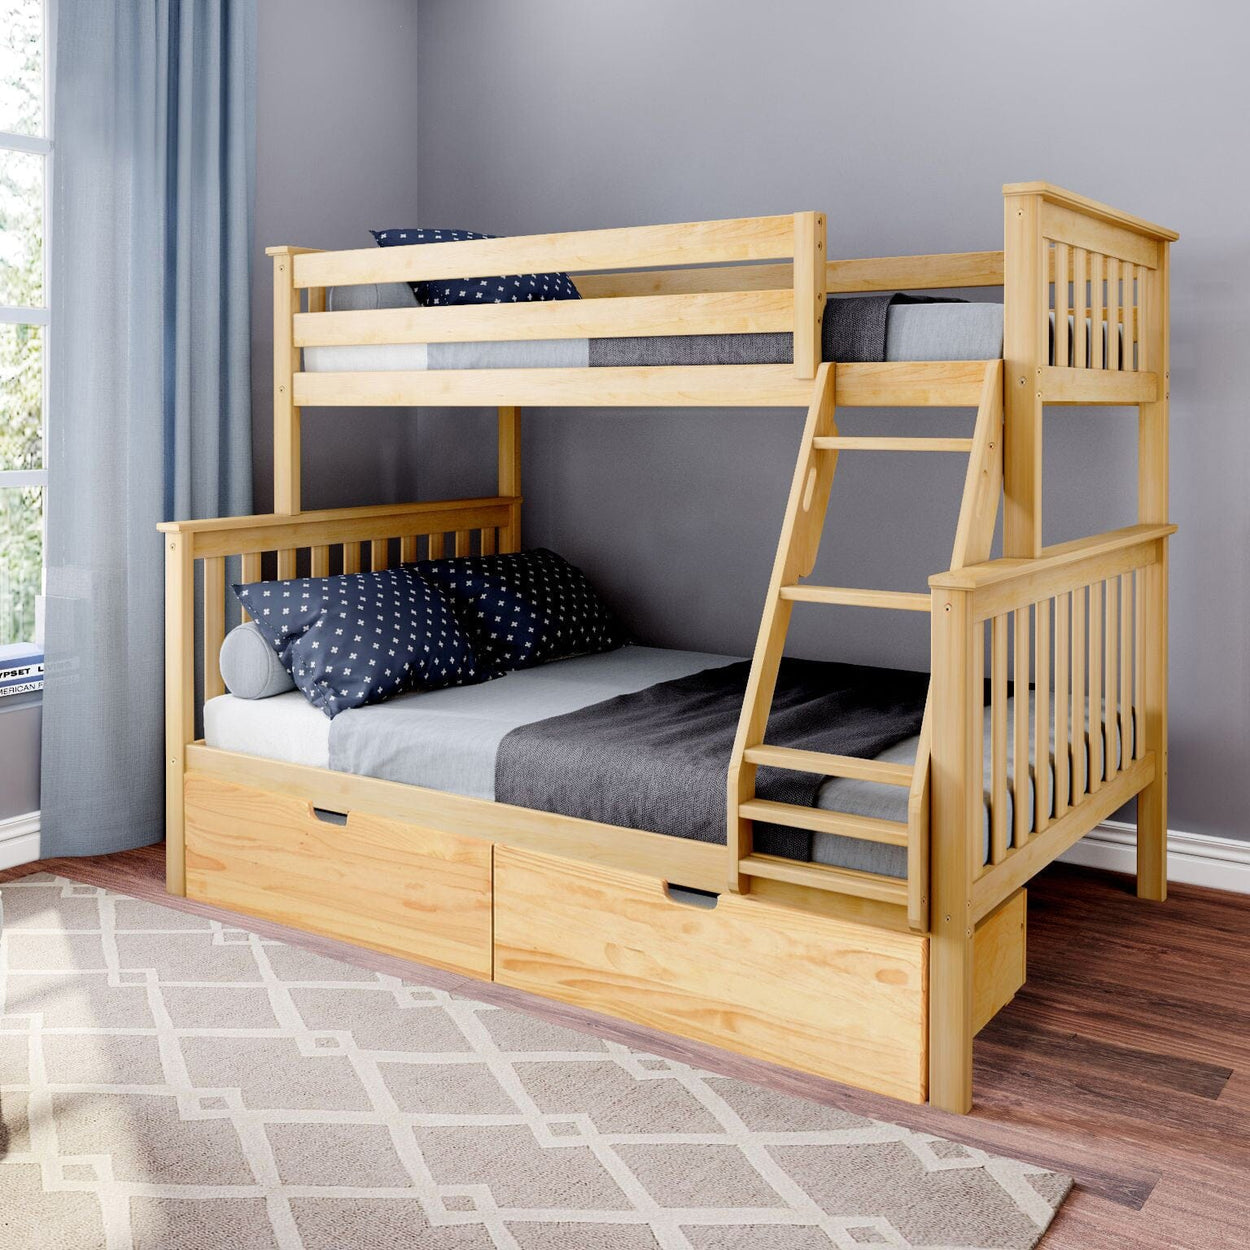 187231-001 : Bunk Beds Twin over Full Bunk Bed + Storage Drawers, Natural